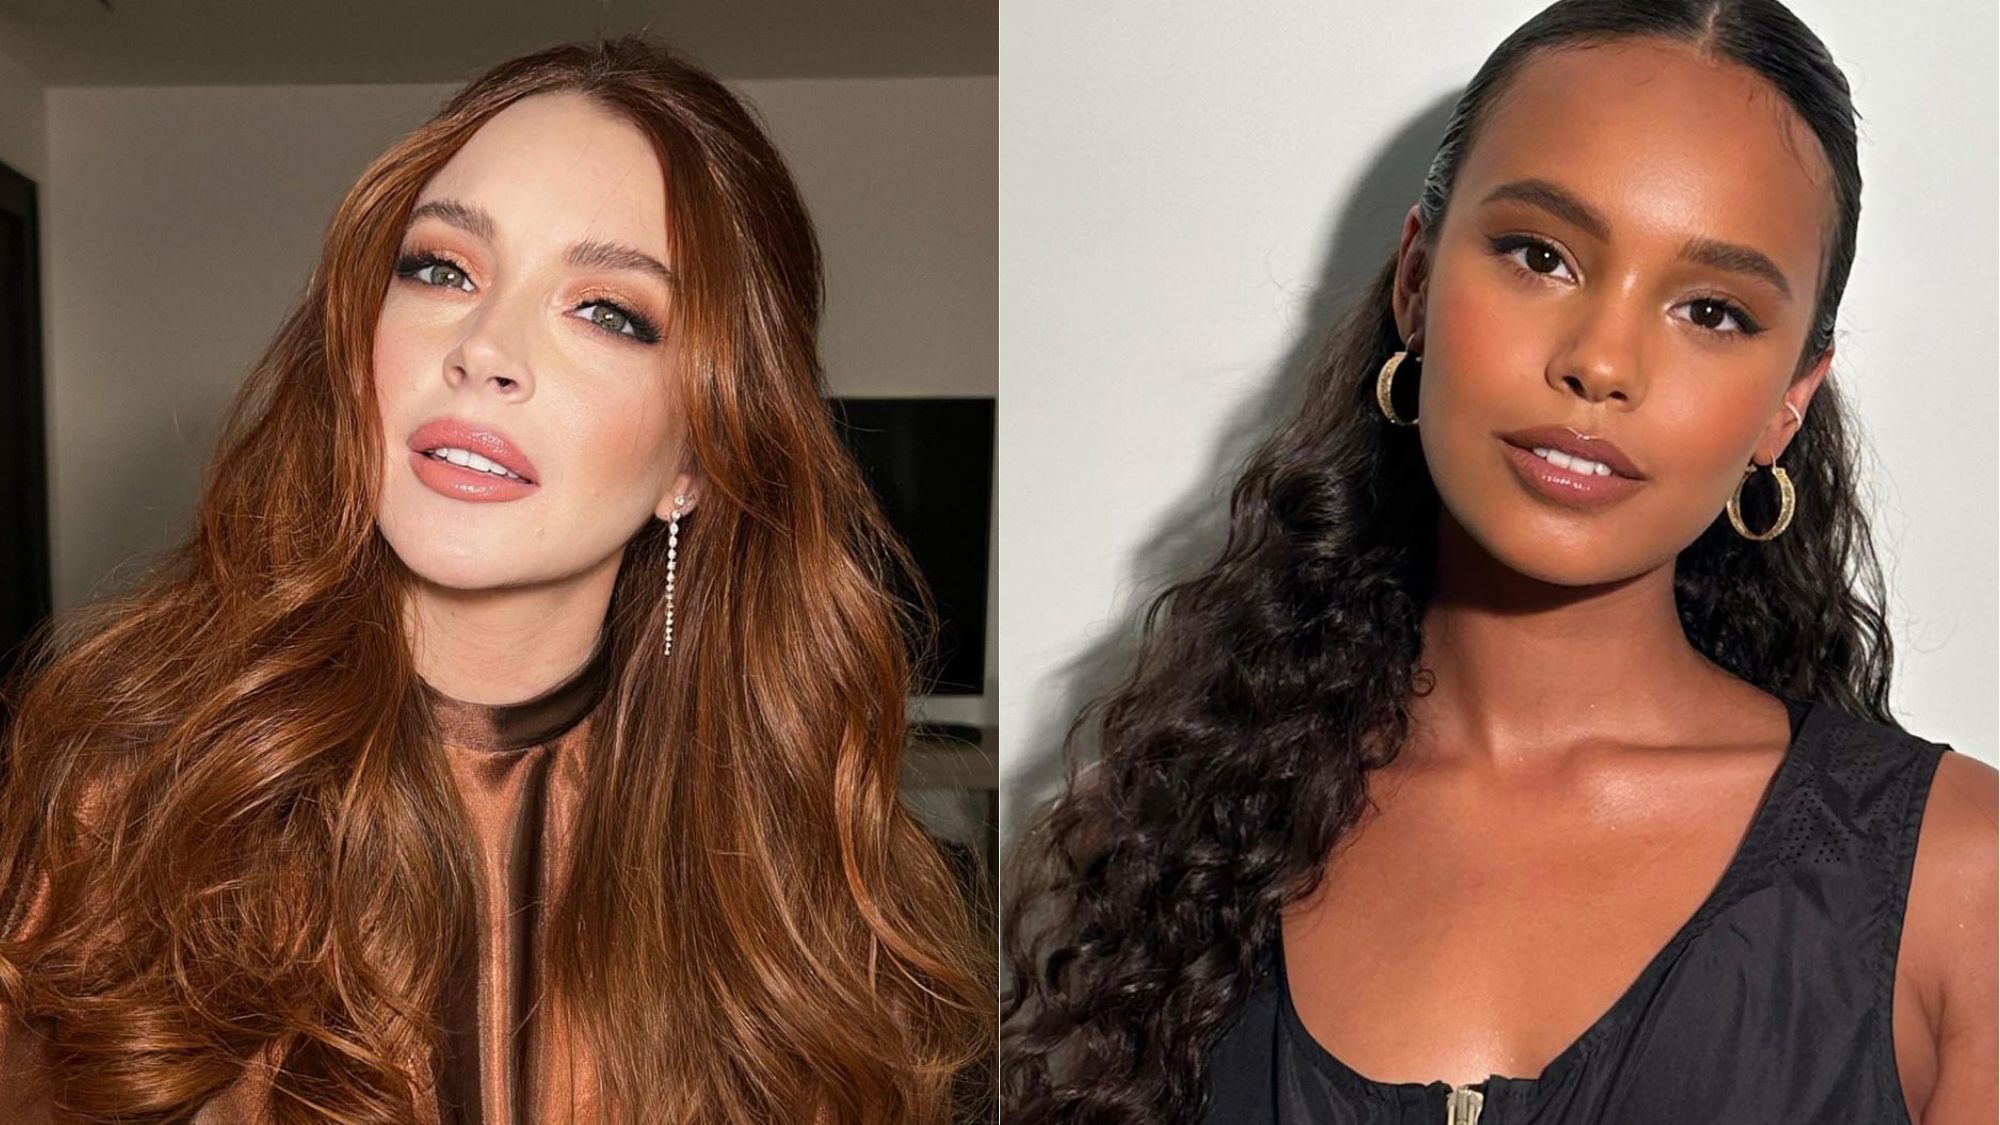 18 Dark Fall Hair Colors to Inspire Your Next Dye Job